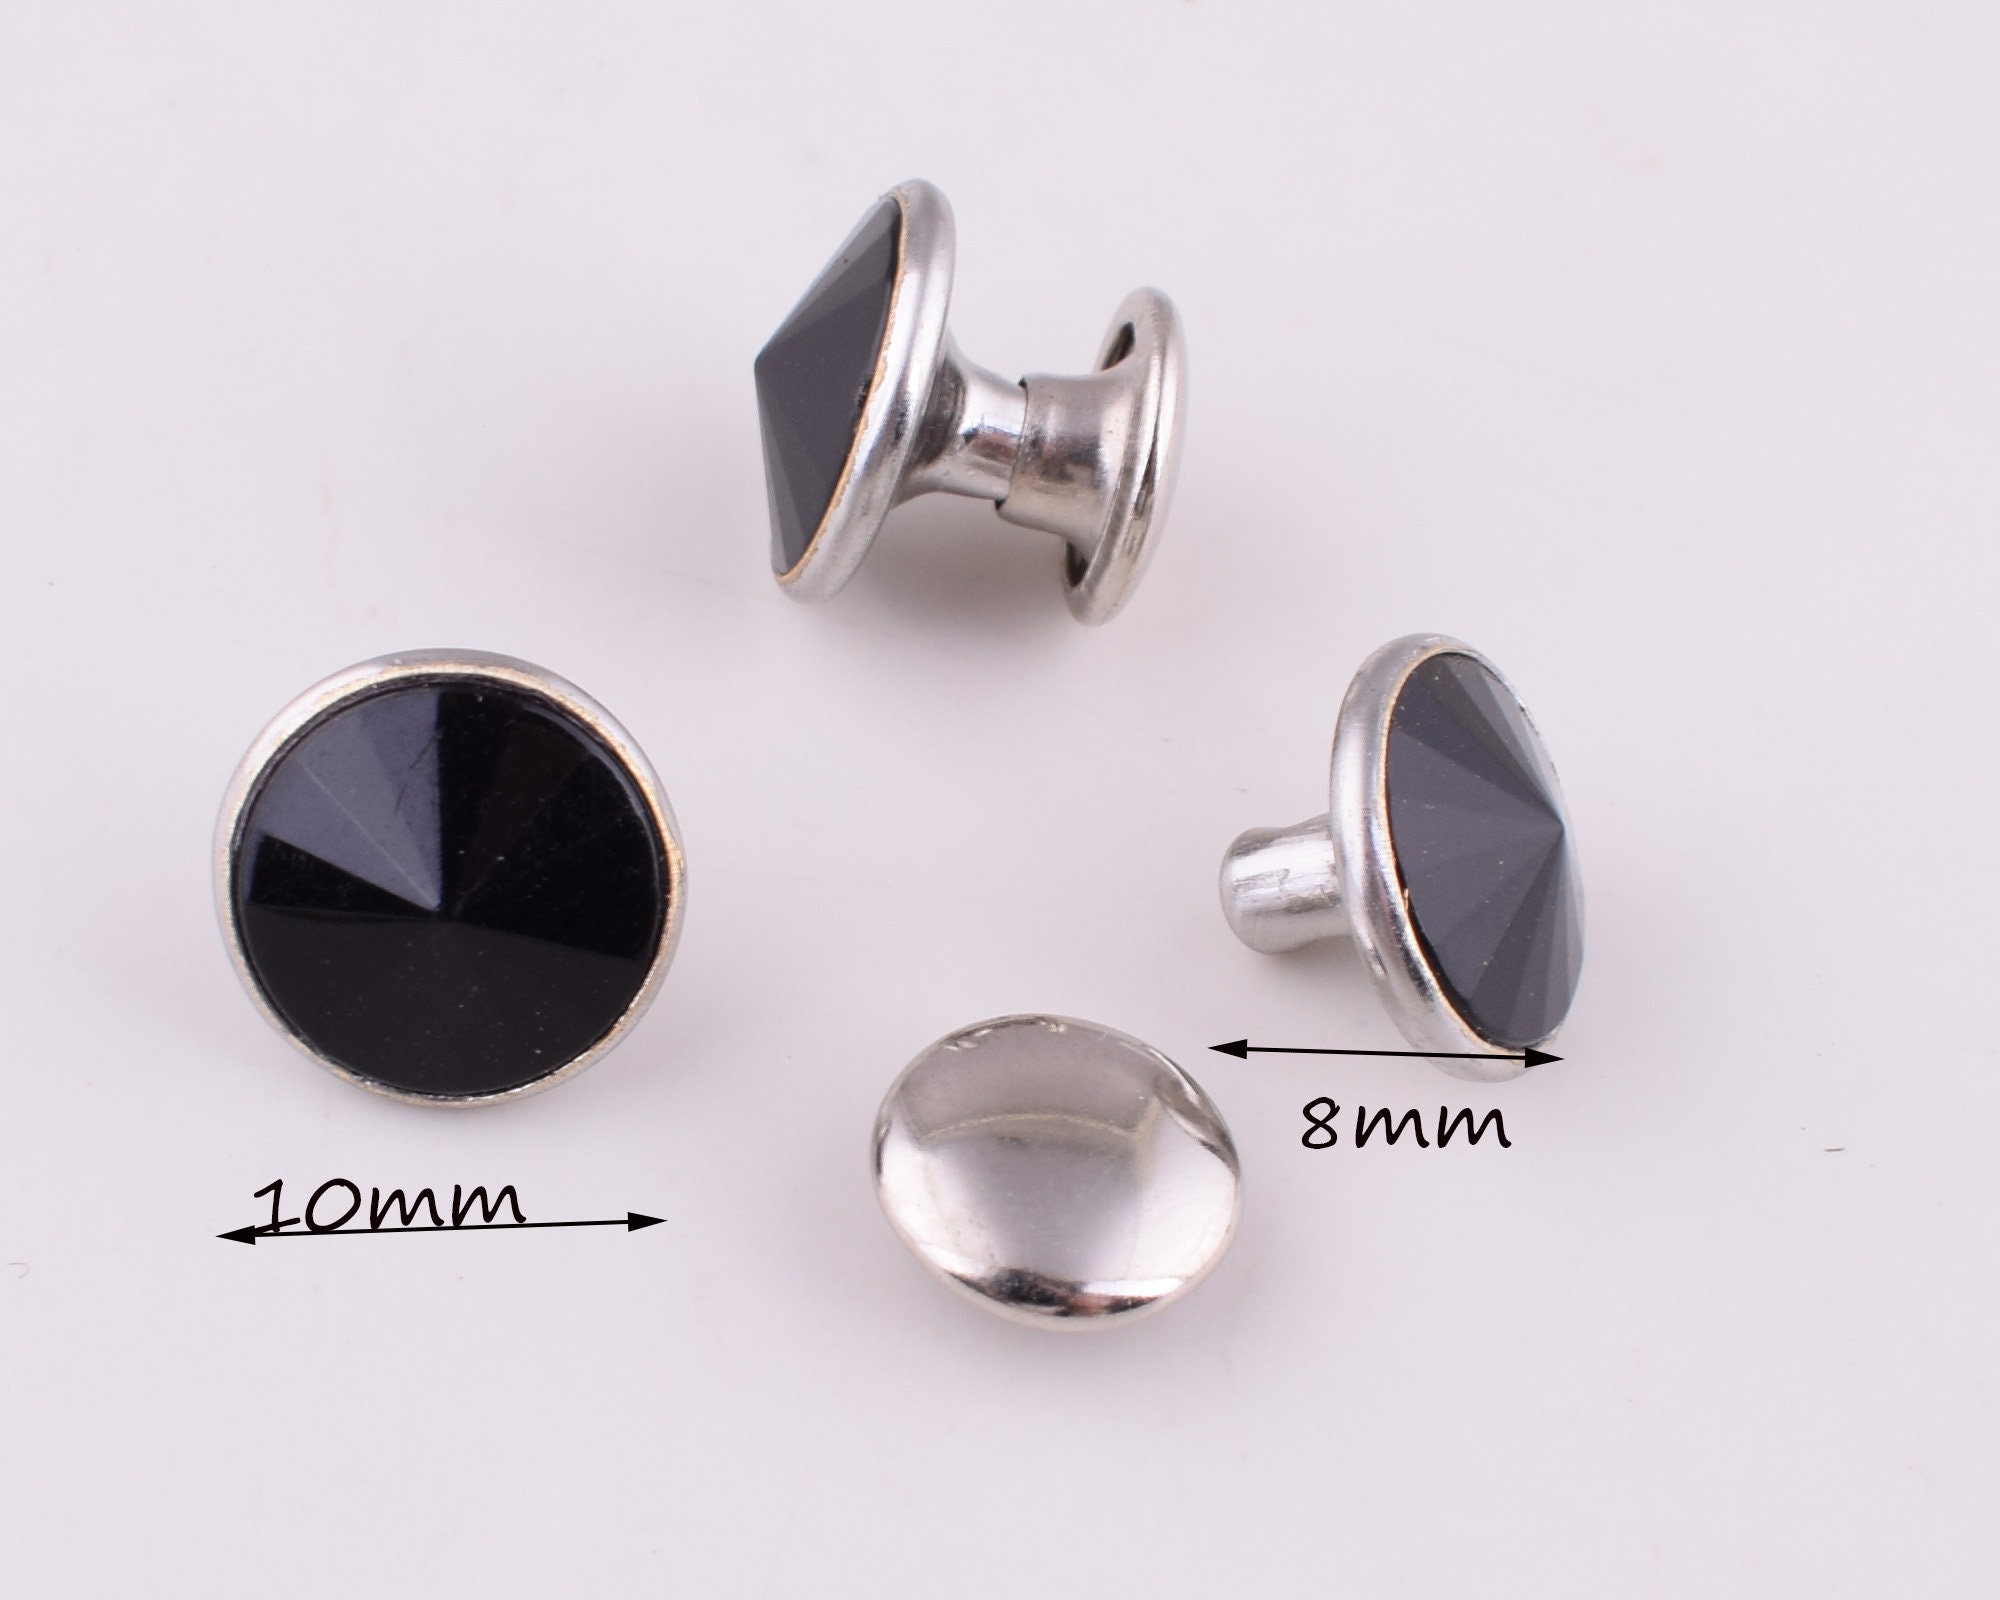 Buy Glass Rhinestone Rivets Leather Rapid Rivets Black Double Cap Rivets  9-13mm Rivets Bulk Glass Rivets for Fabric/clothing/leather Online in India  